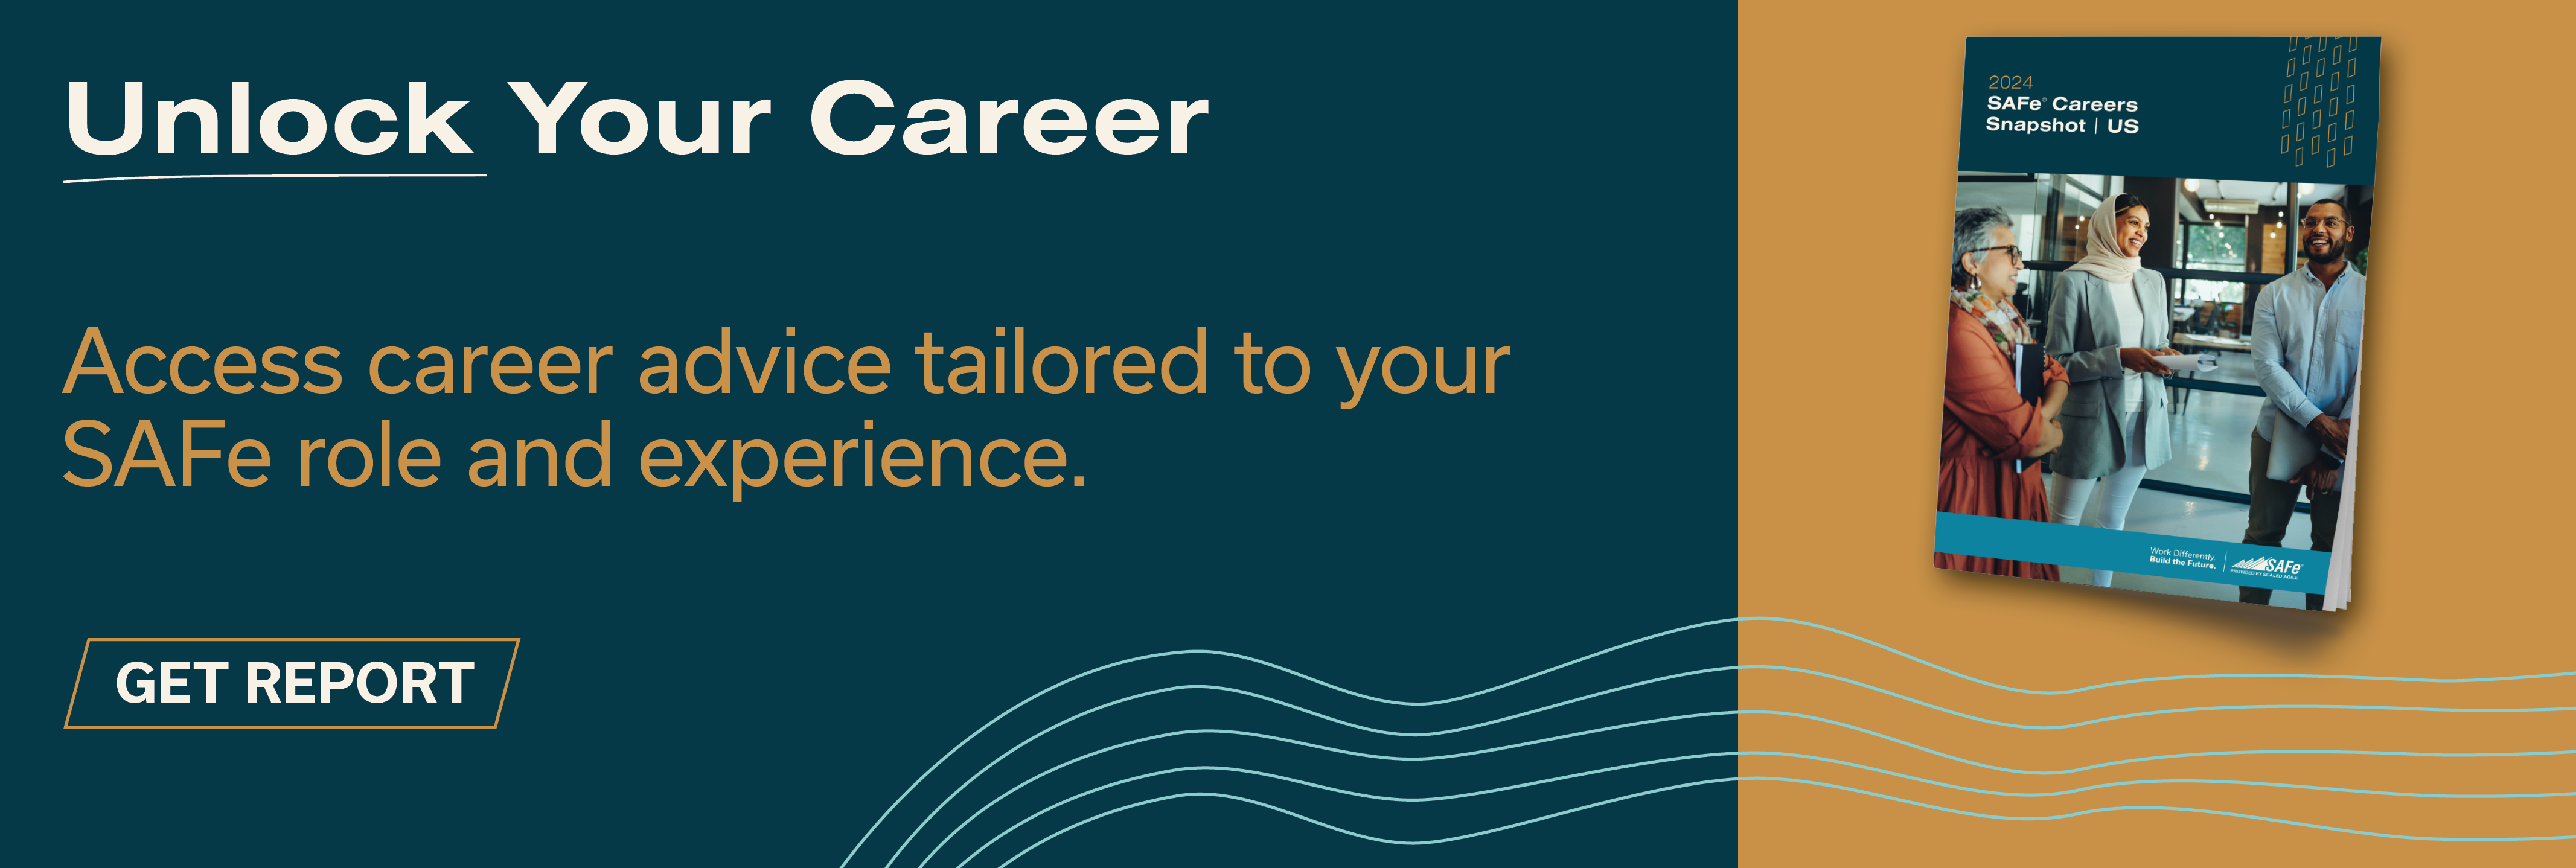 Unlock Your Career
Access career advice tailored to your SAFe role and experience. 
Get Report